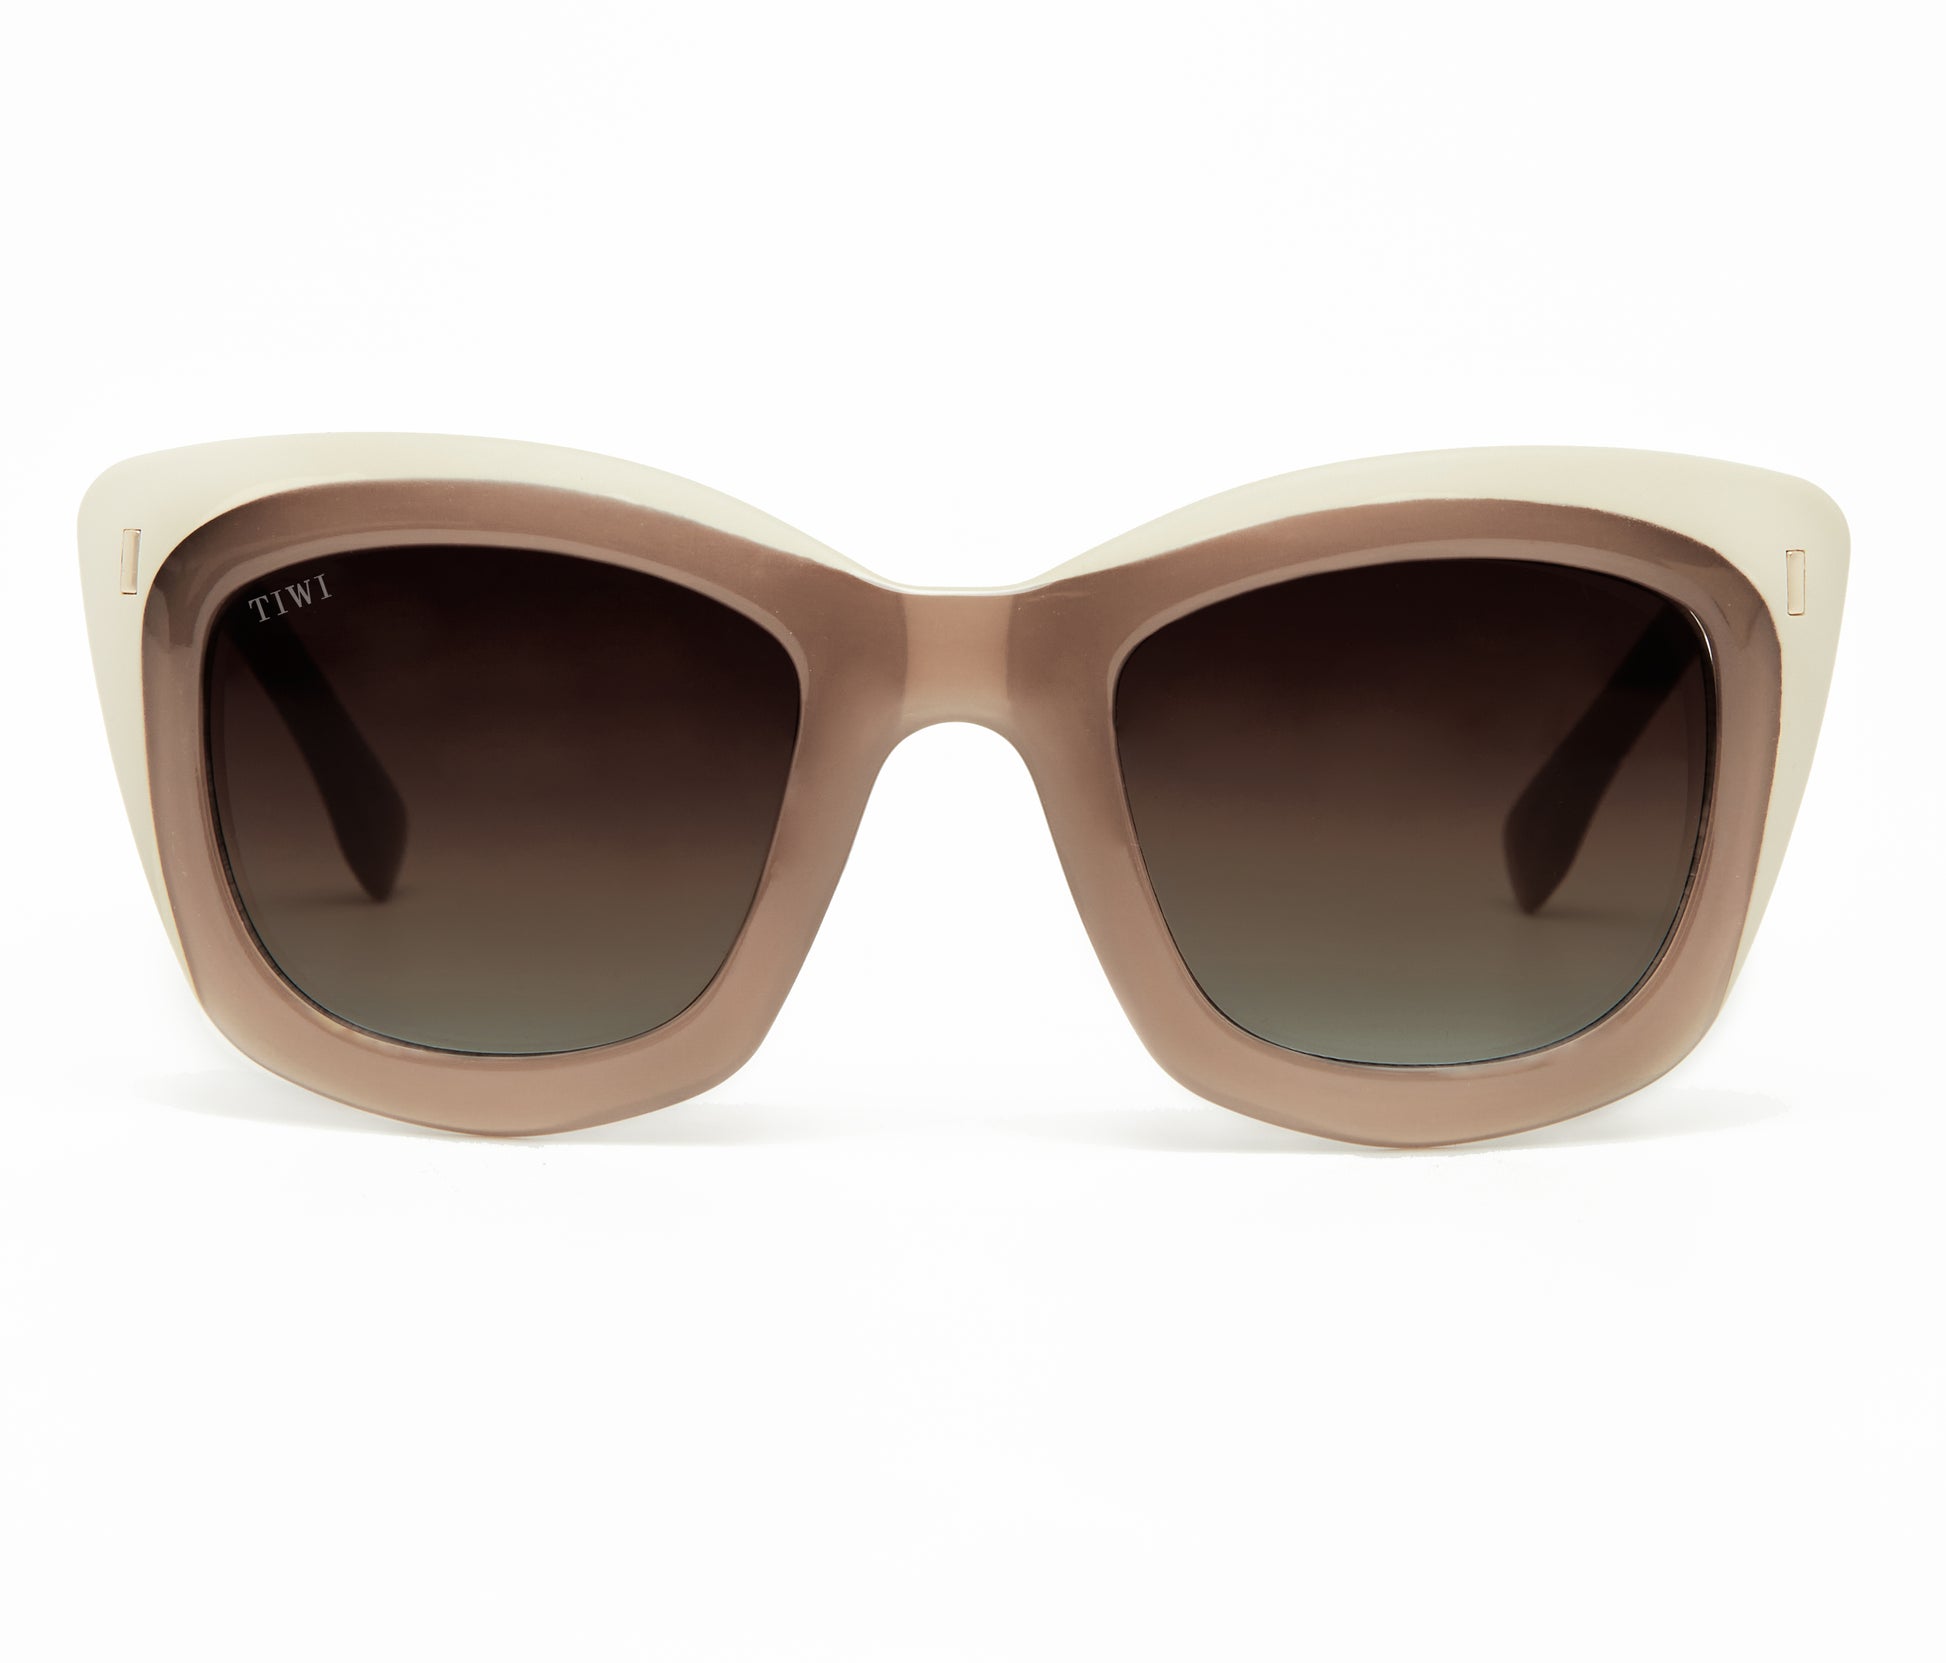 FIER Sunglasses Available in more colors Coconut/Beige  